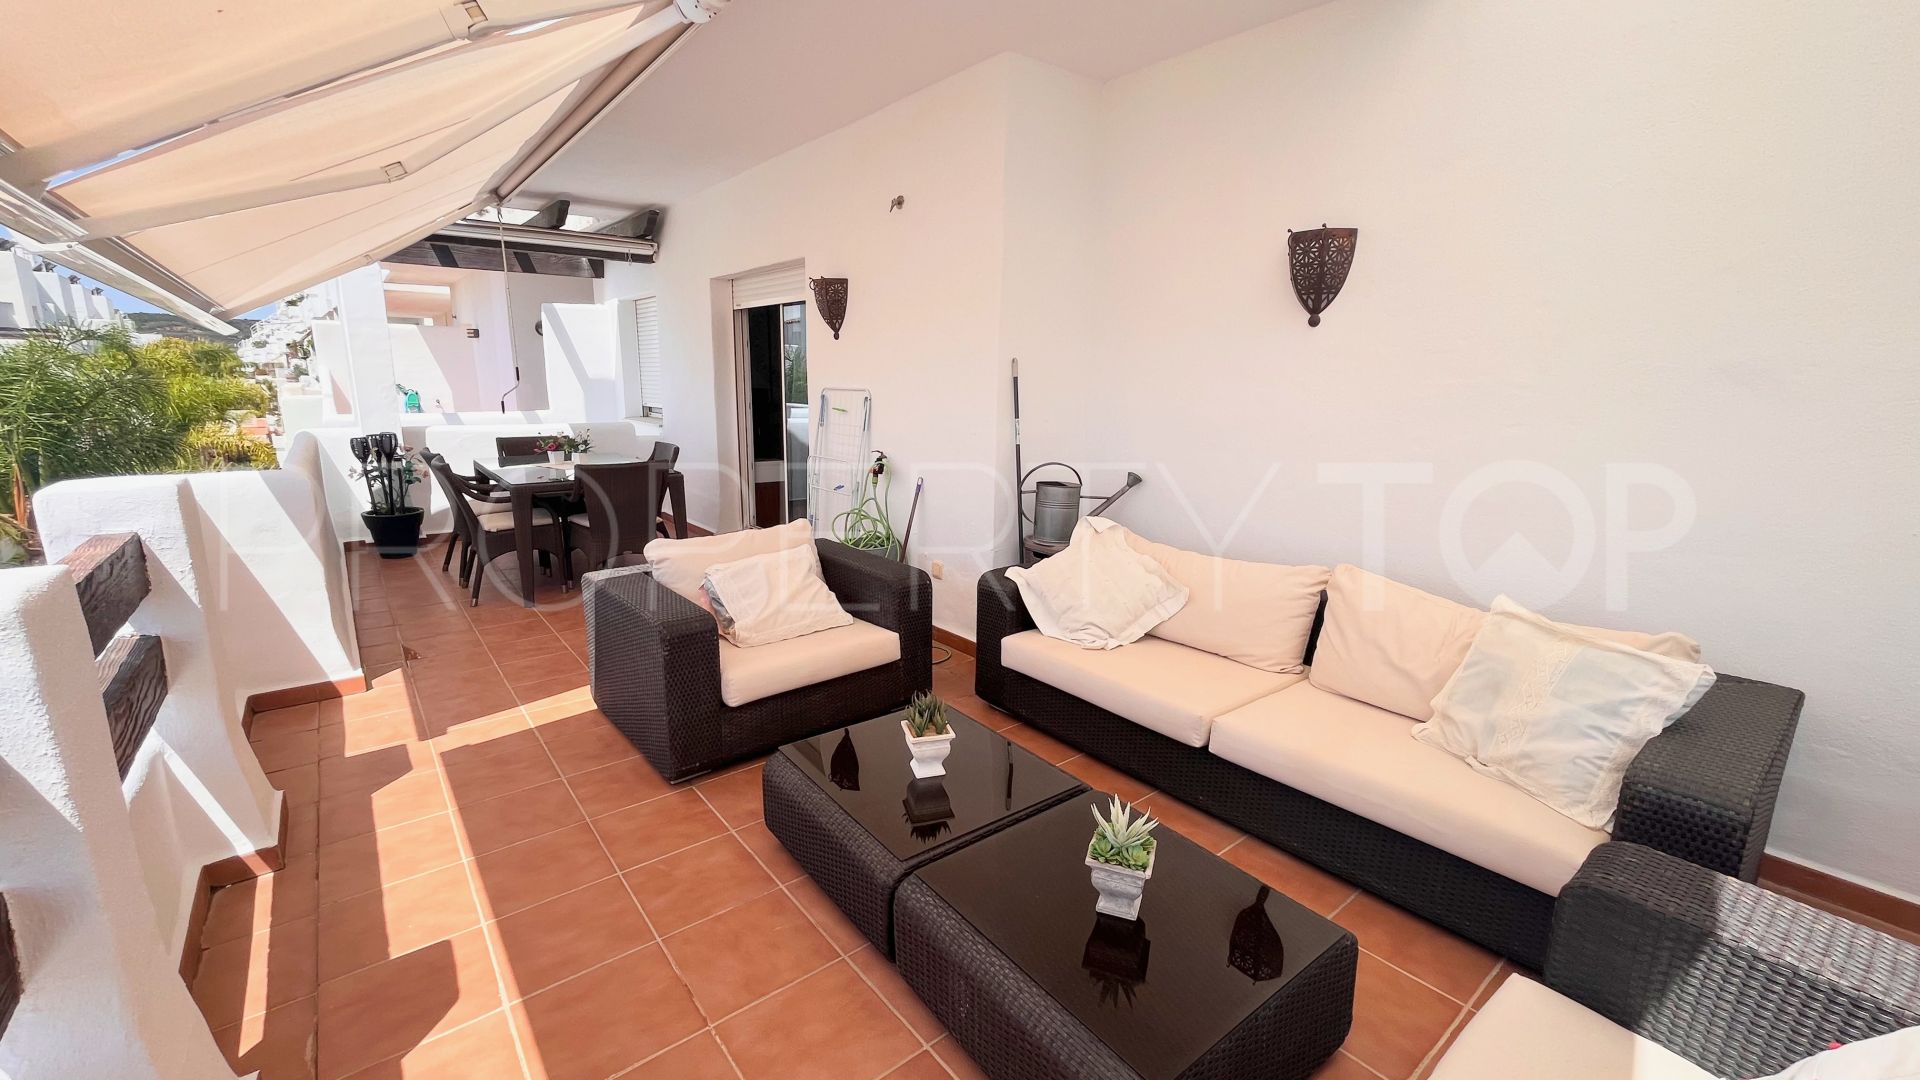 Apartment with 2 bedrooms for sale in Estepona